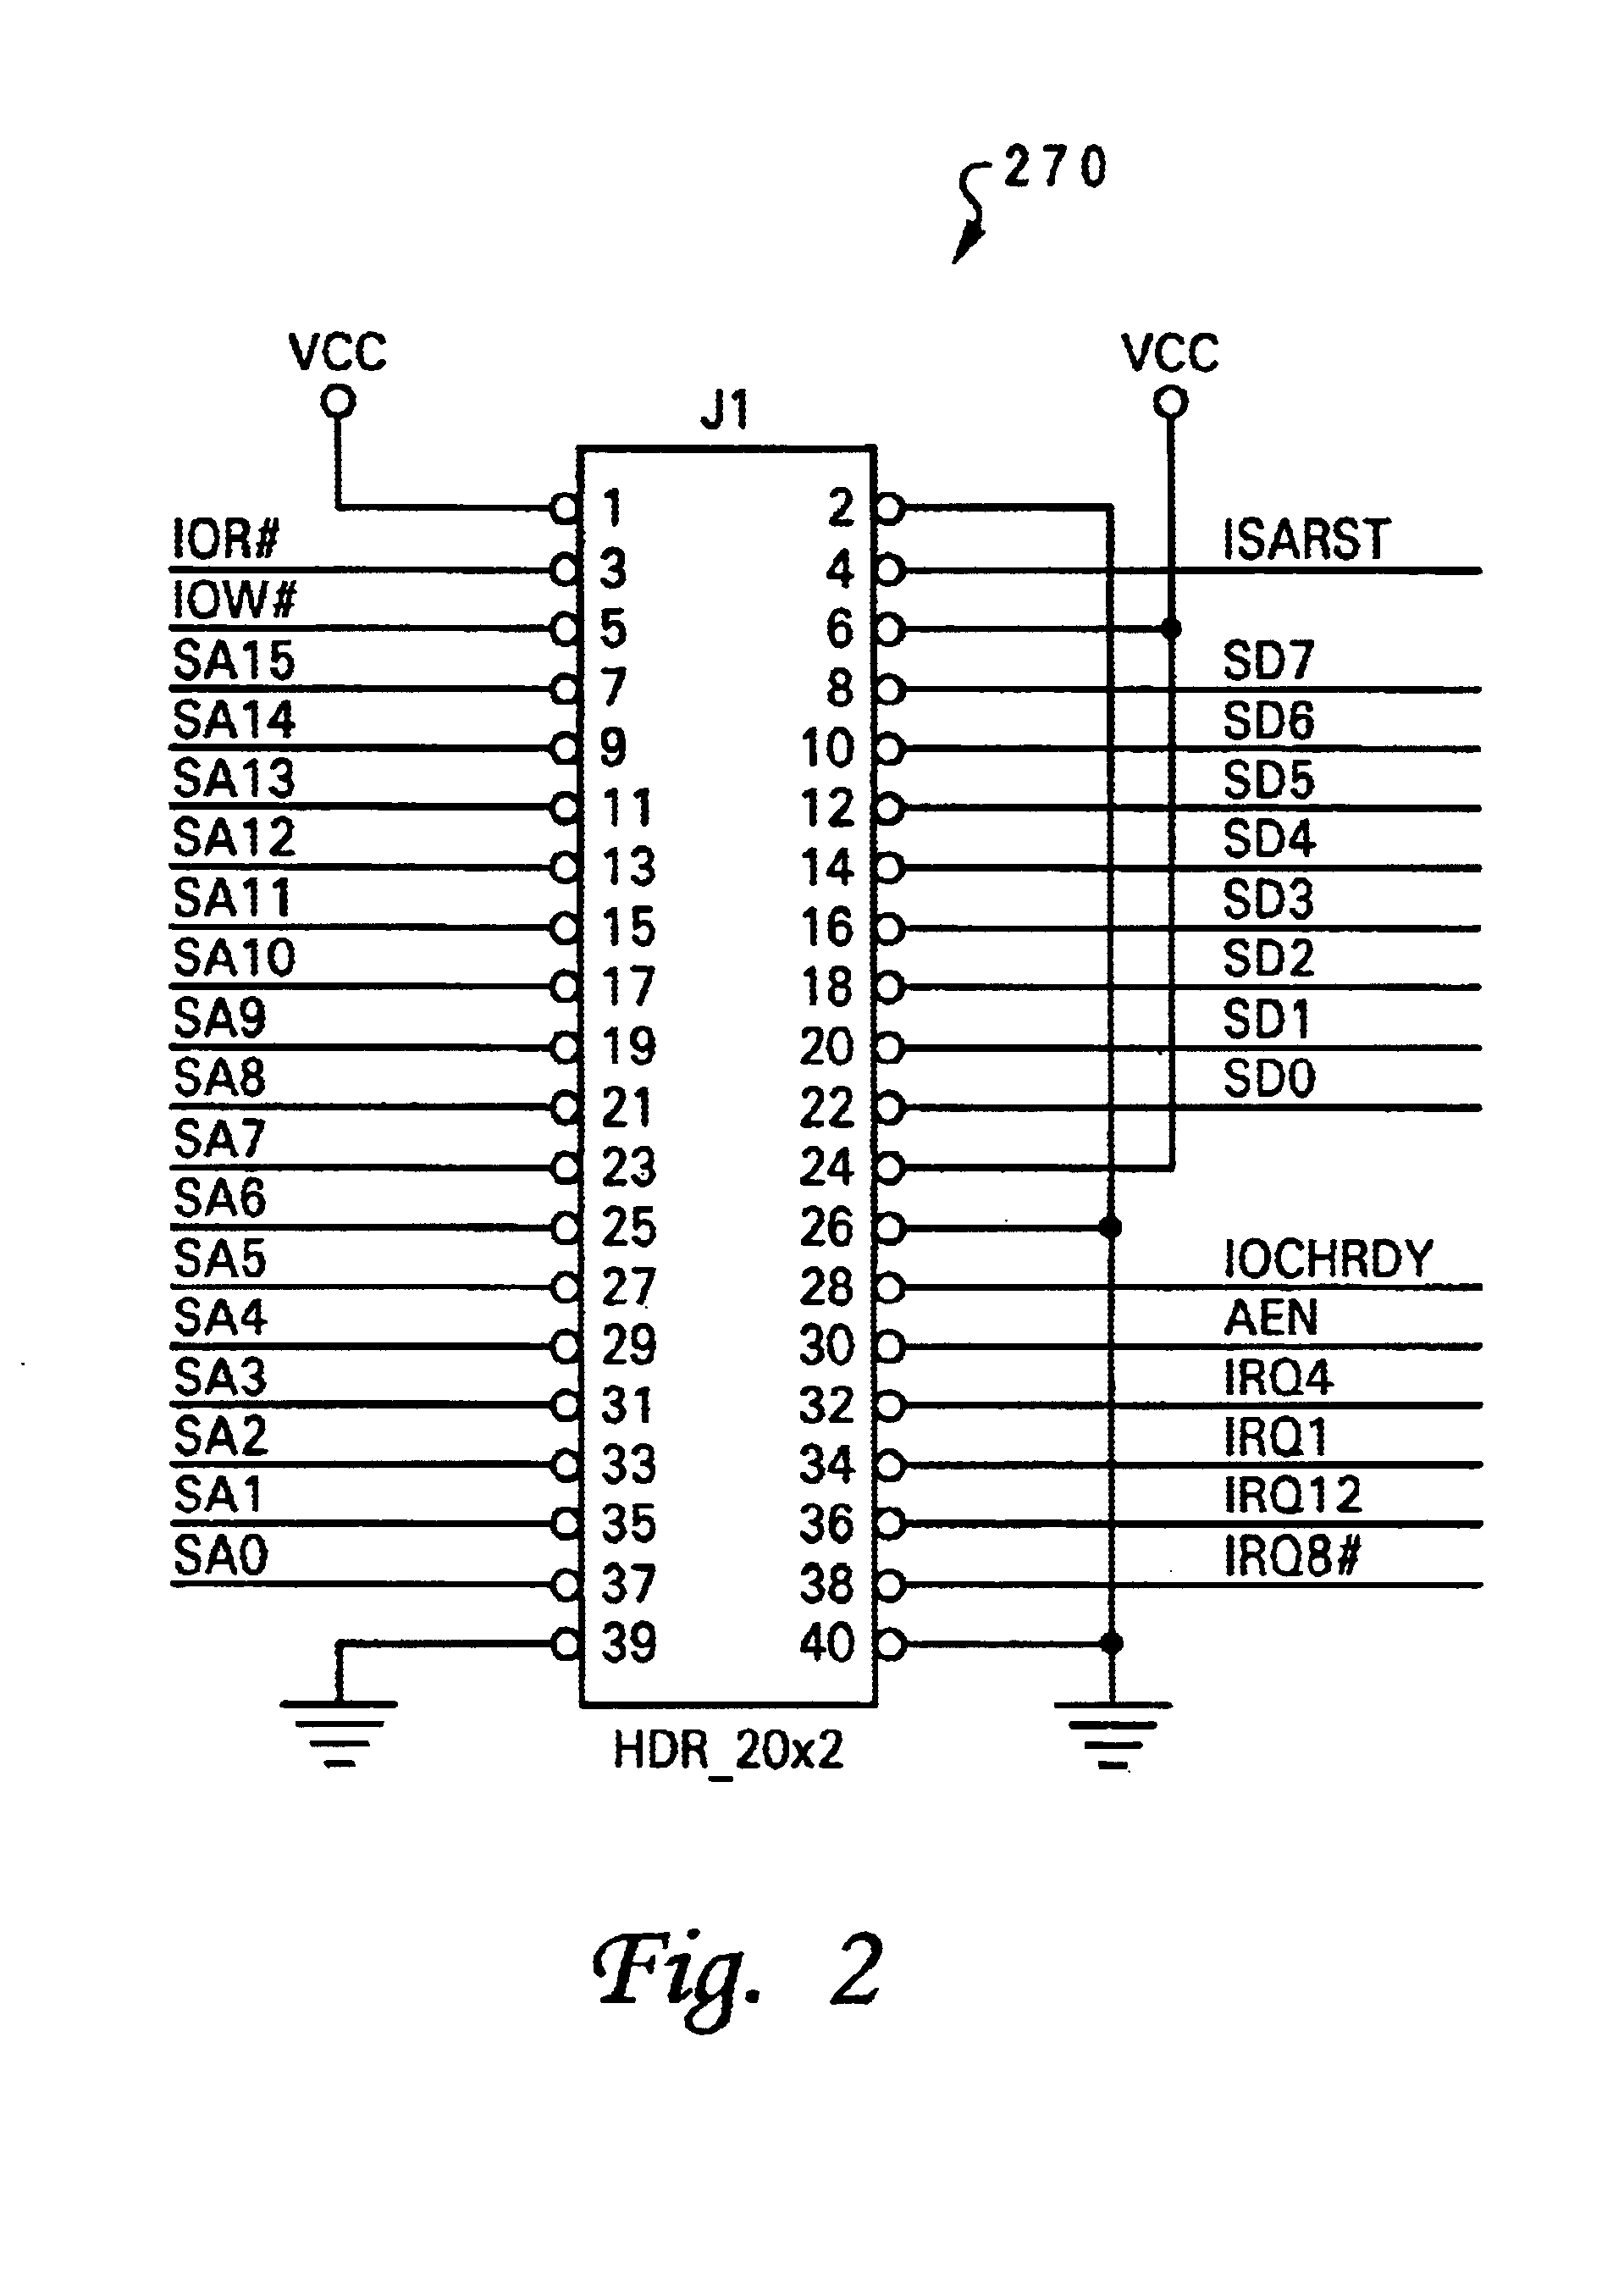 Compact diagnostic connector for a motherboard of data processing system